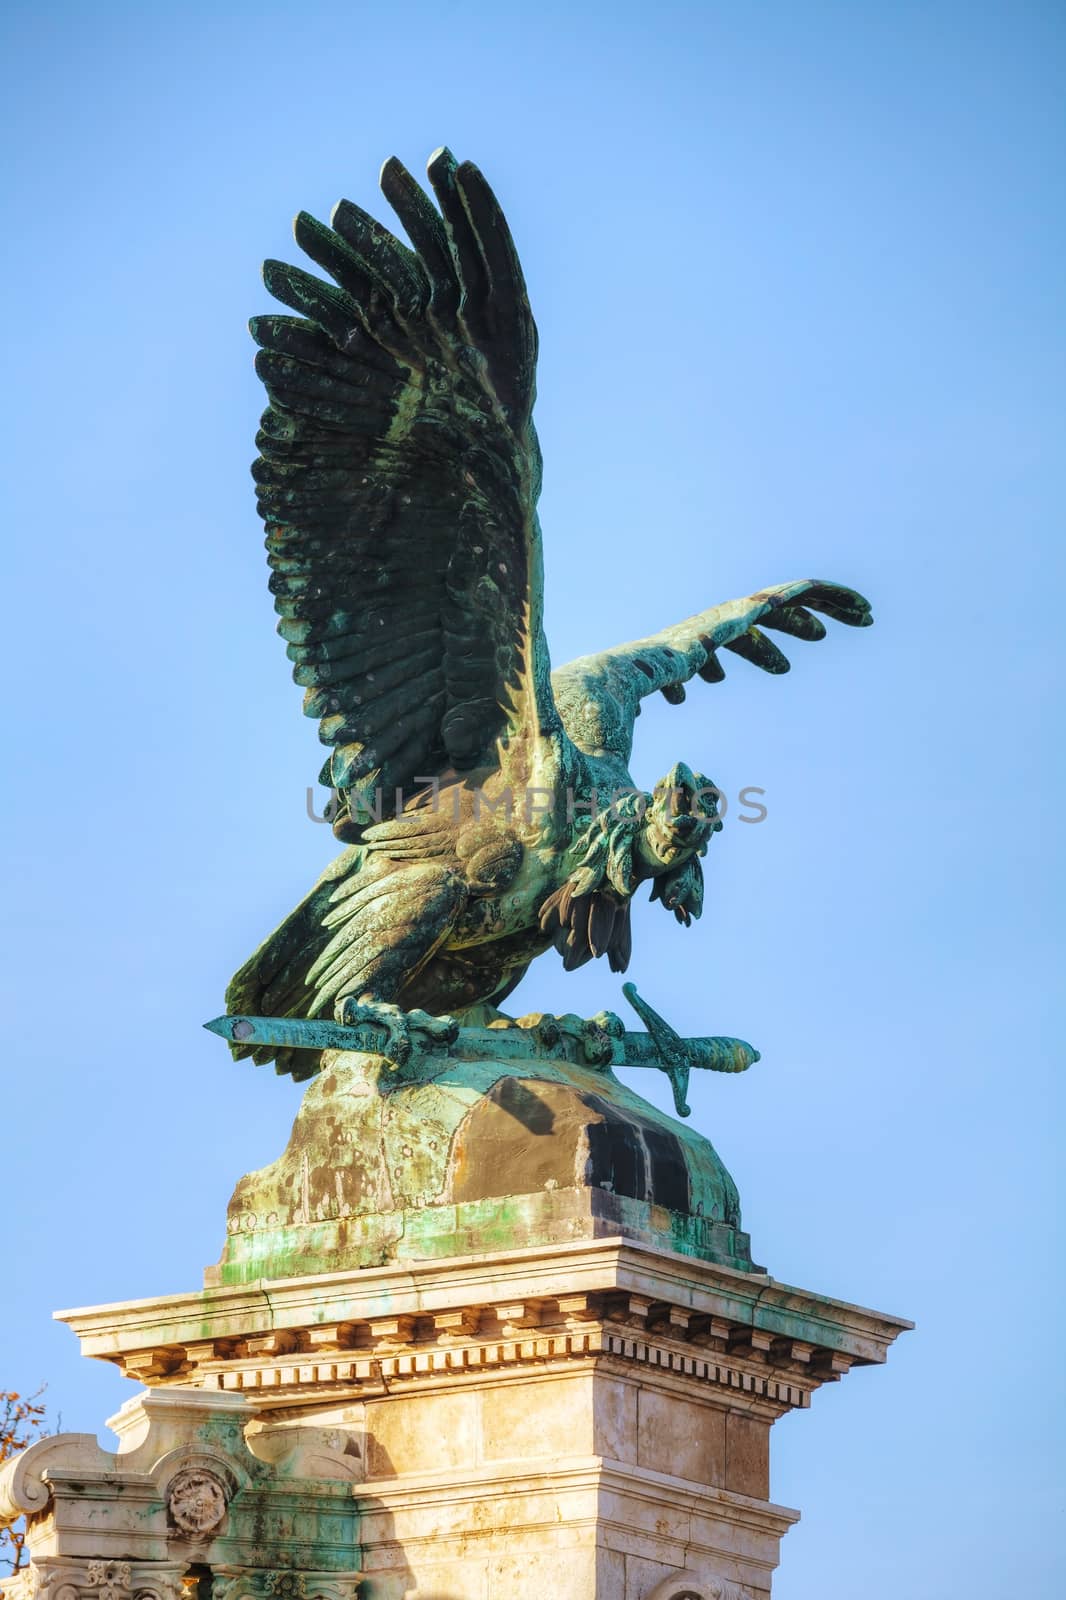 BUDAPEST - OCTOBER 21: Statue of Turulbird at the Royal castle on October 21, 2014 in Budapest, Hungary. The Turul is the most important bird in the origin myth of the Magyars (Hungarian people).